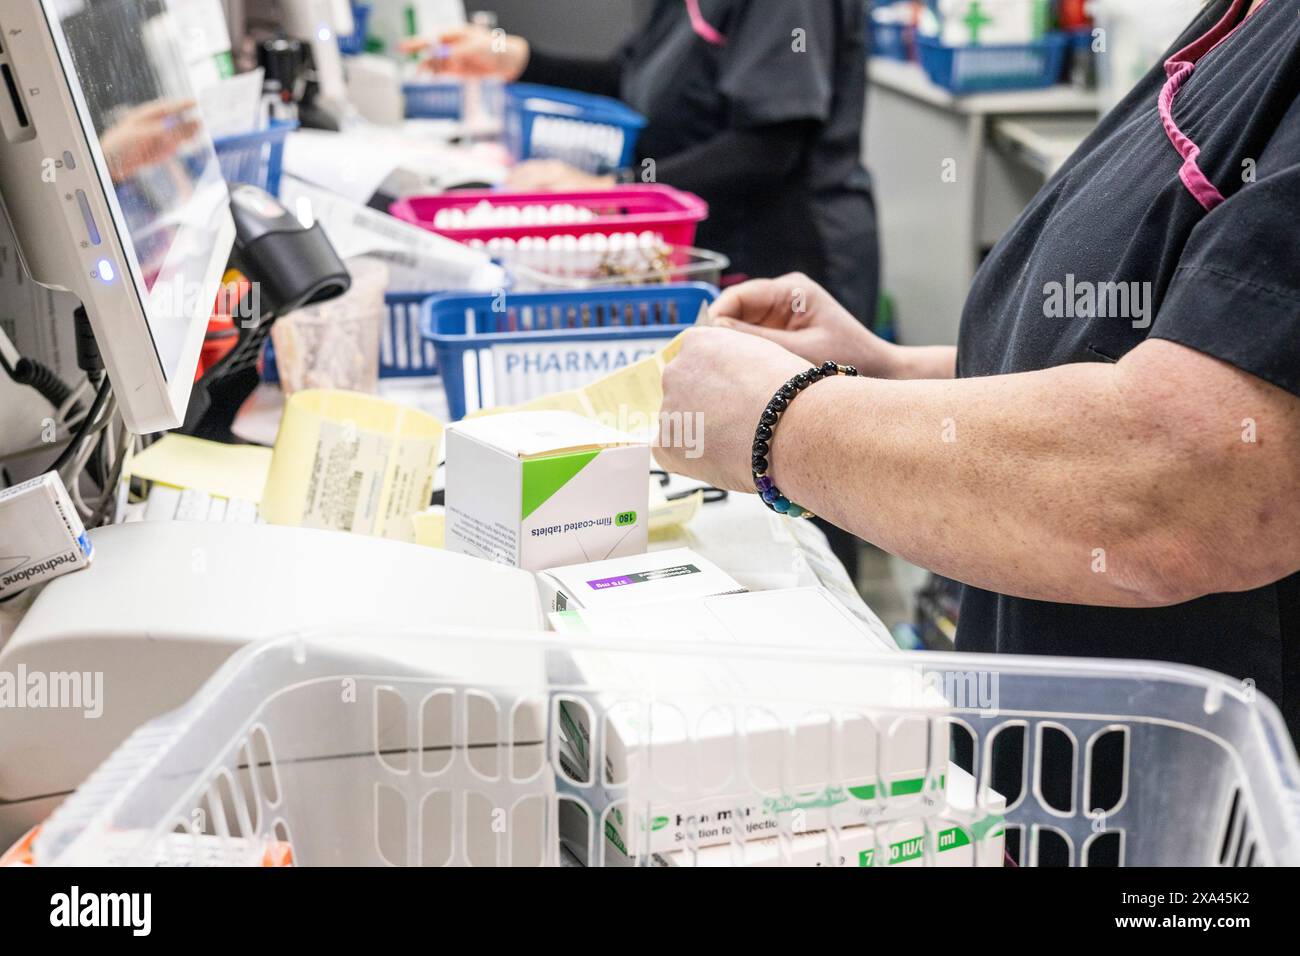 Pharmacist organizing medication boxes beside a computer in a pharmacy. Stock Photo